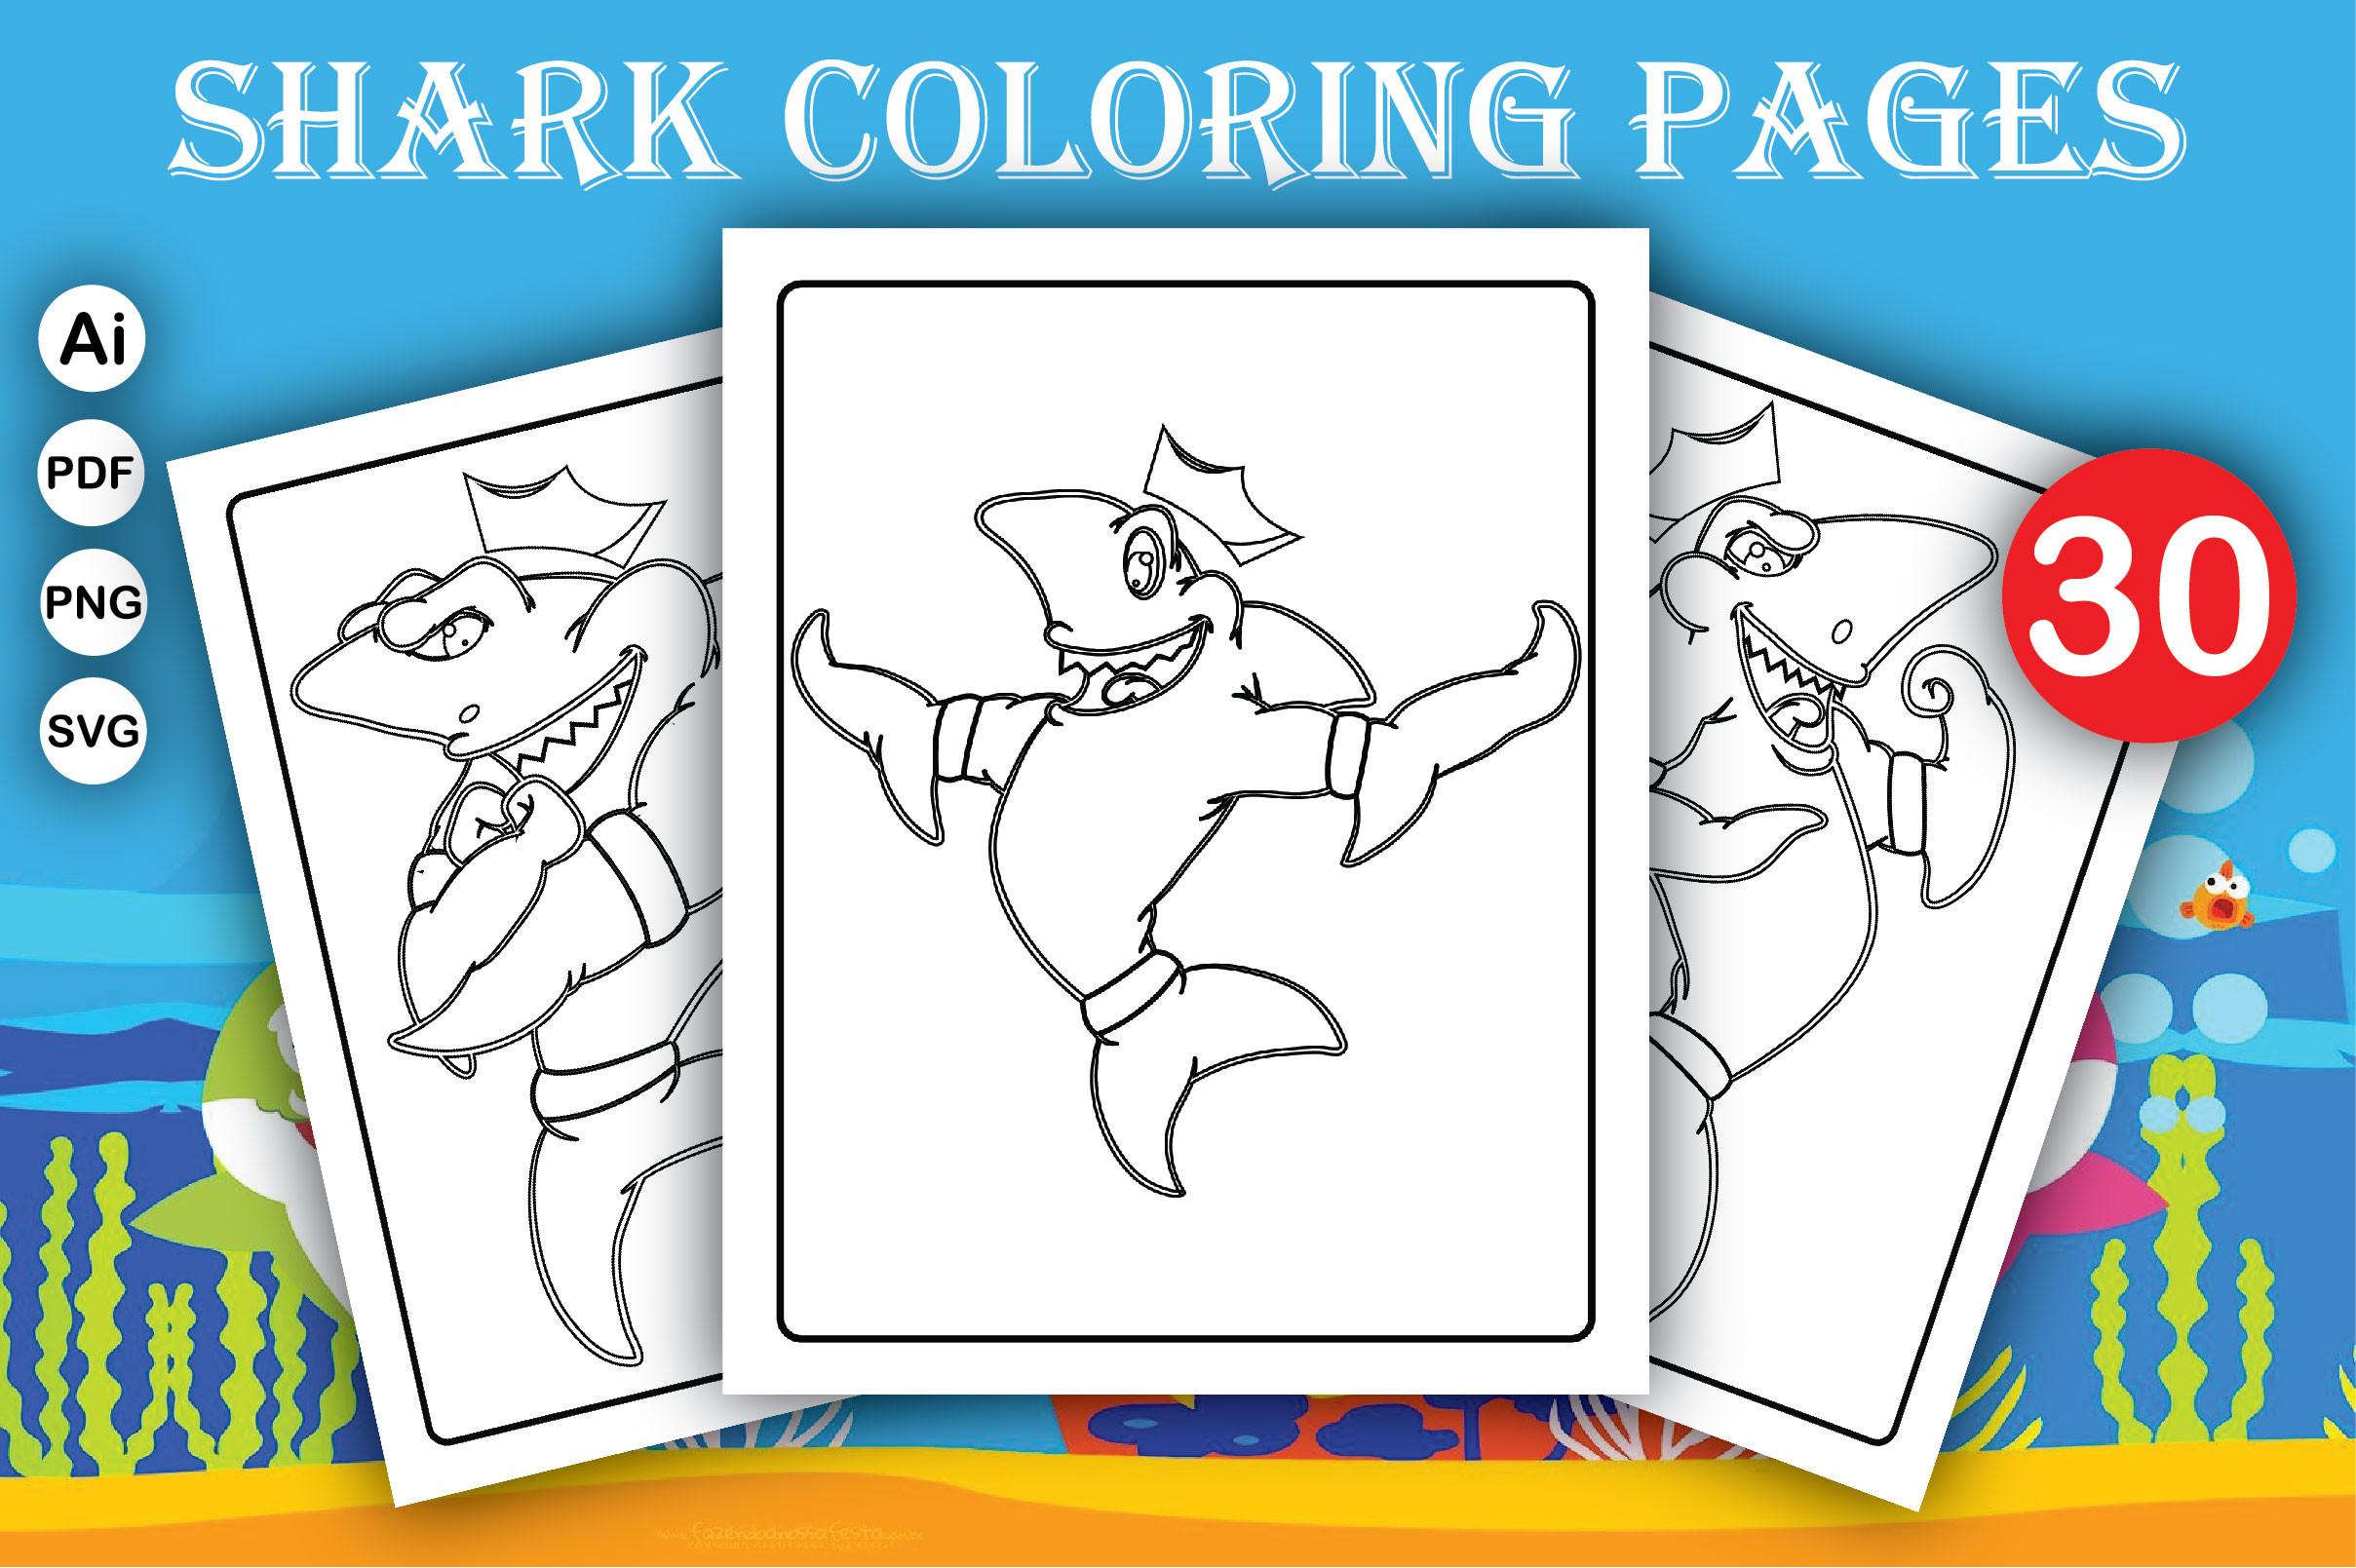 Shark Coloring Books for Kids and Adults